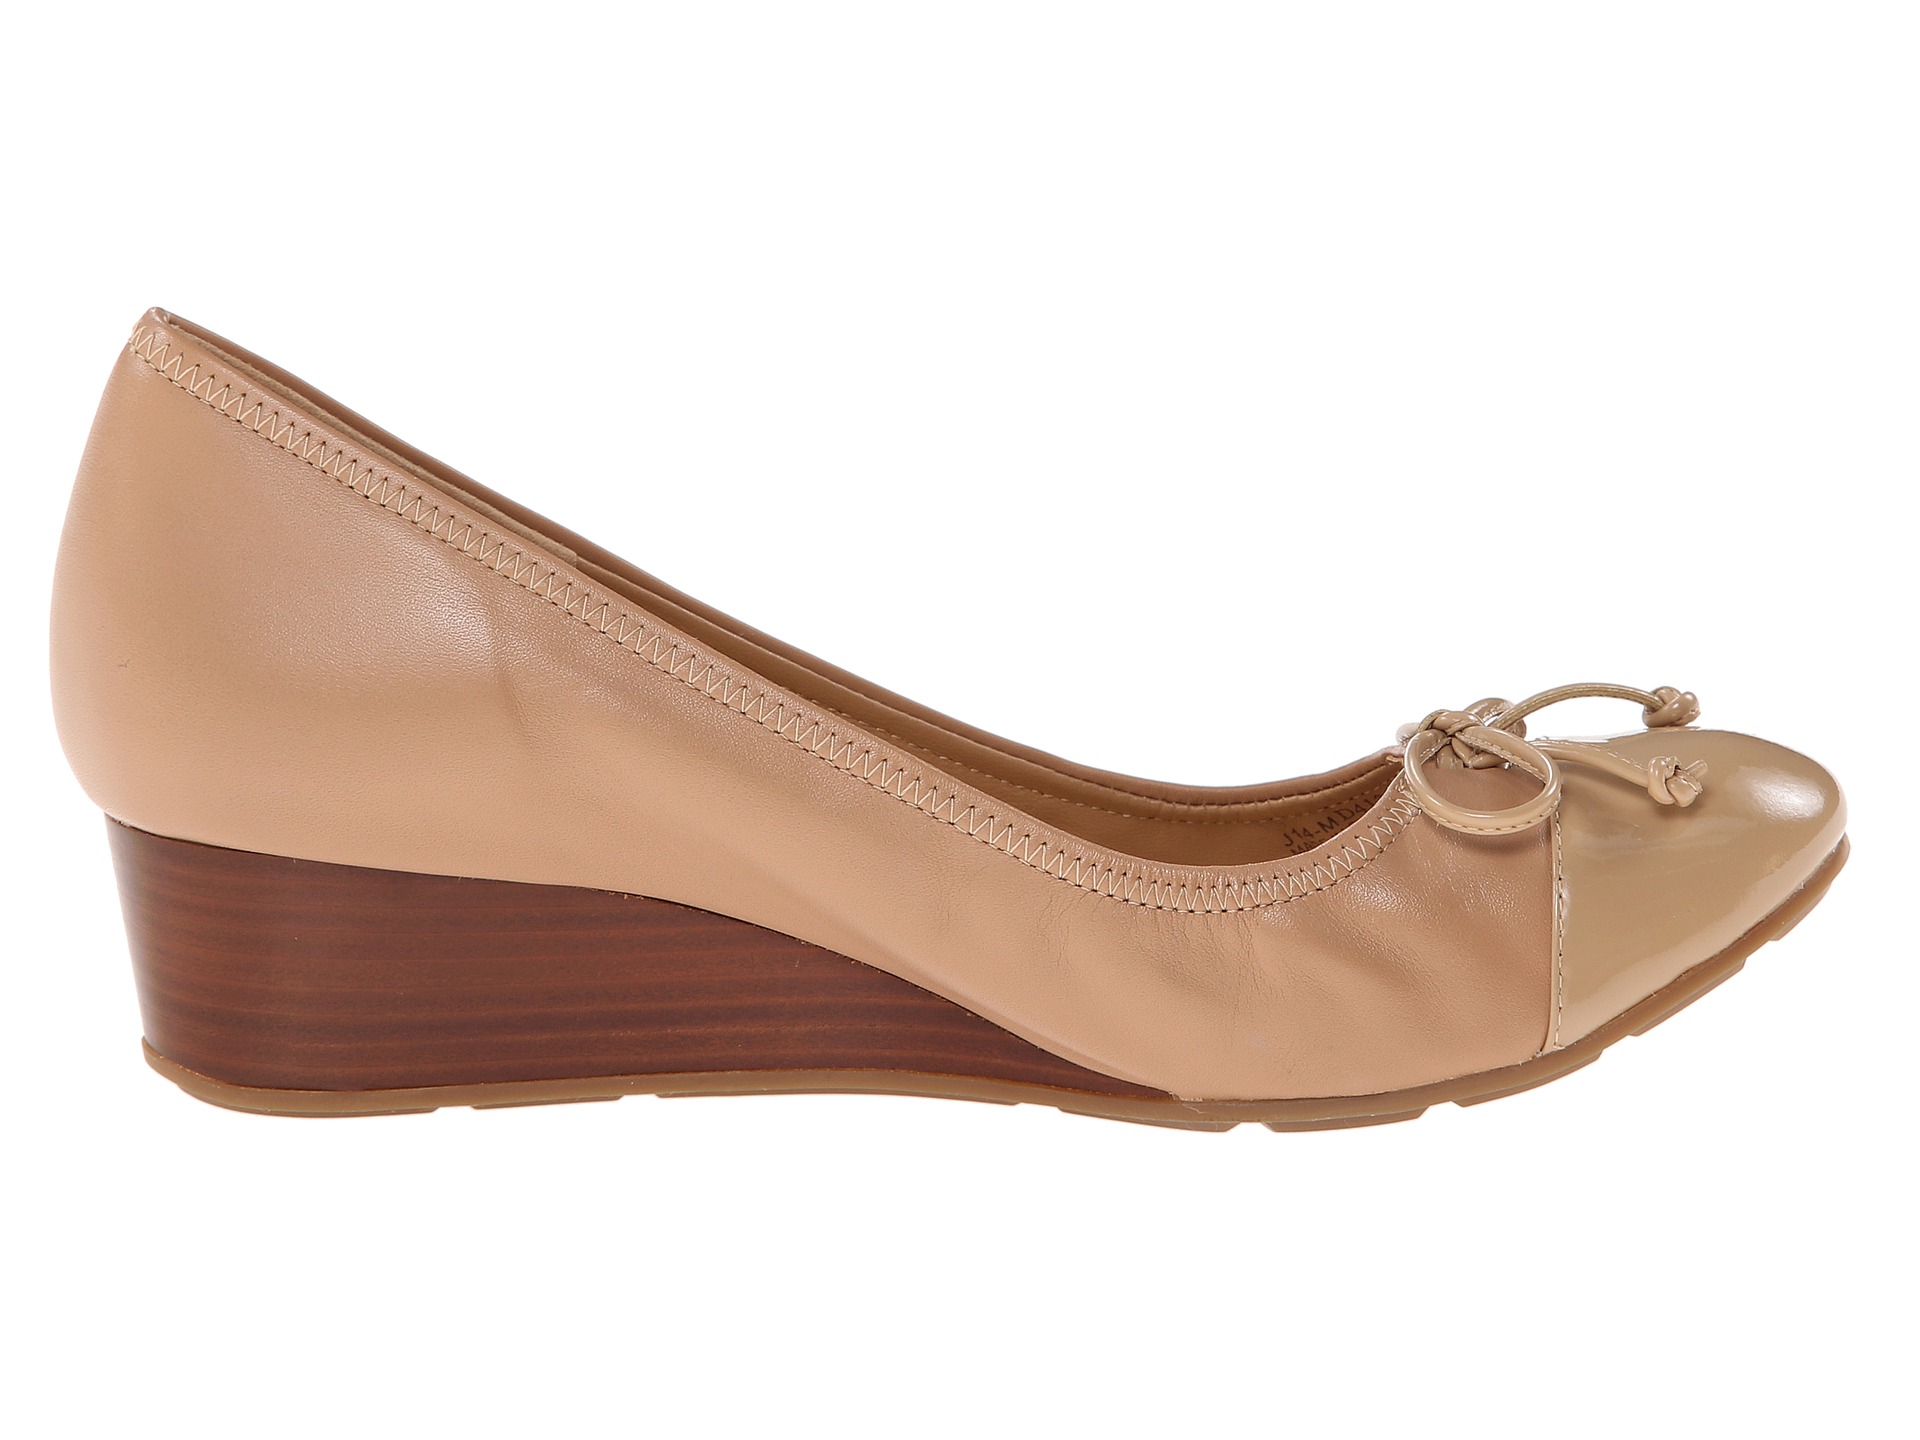 Cole Haan Air Tali Lace Wedge Sandstone/Sandstone Patent